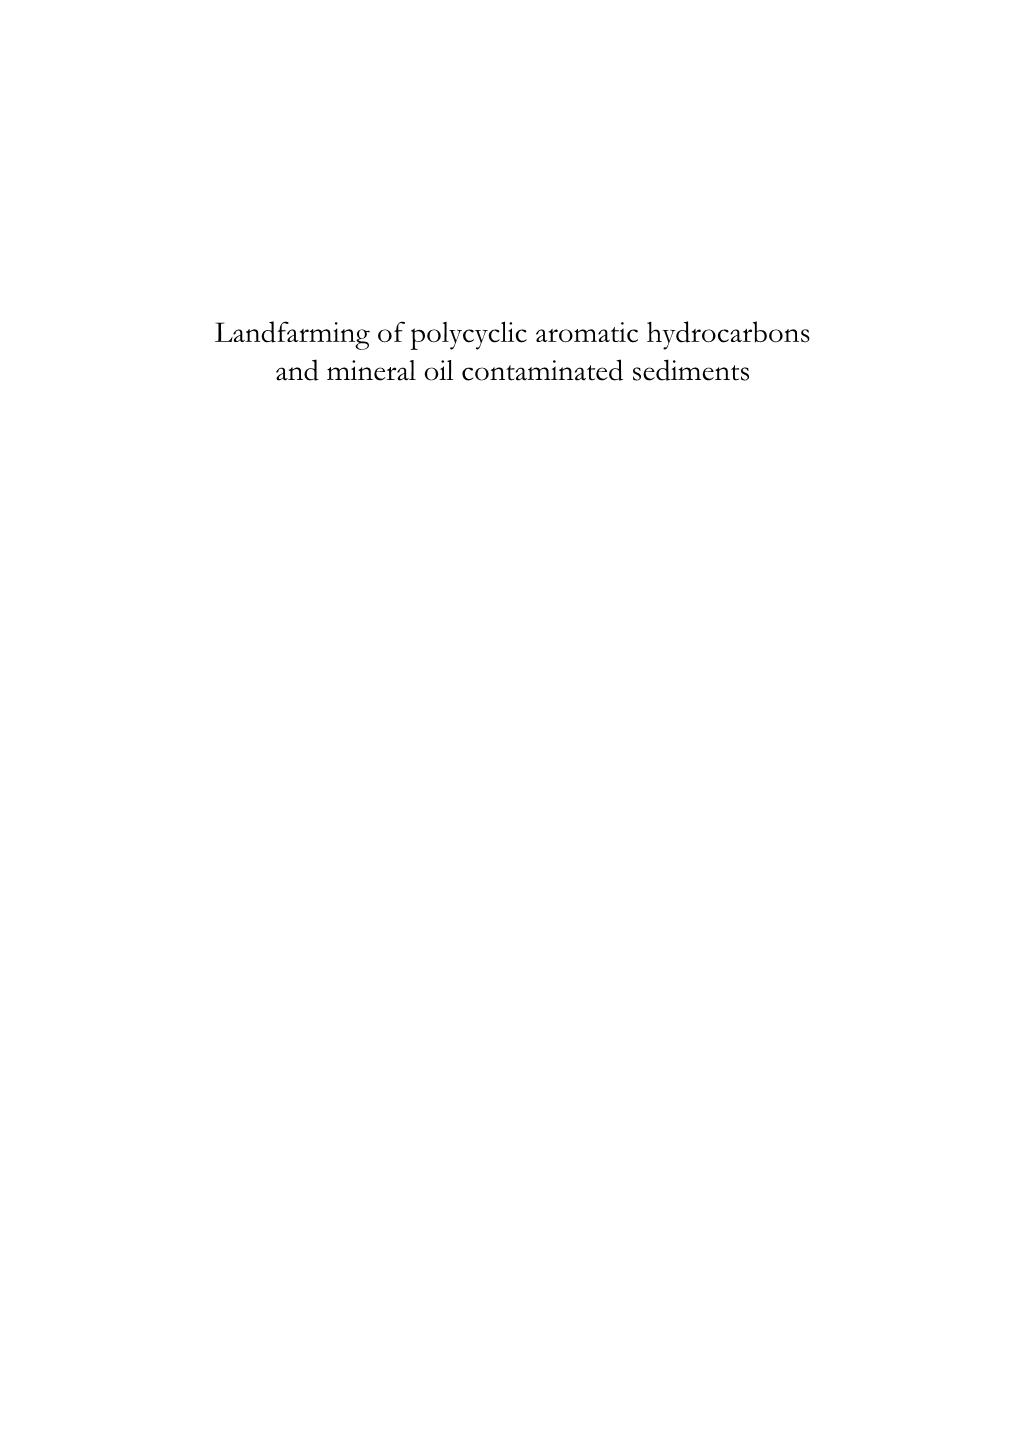 Landfarming of Polycyclic Aromatic Hydrocarbons and Mineral Oil Contaminated Sediments